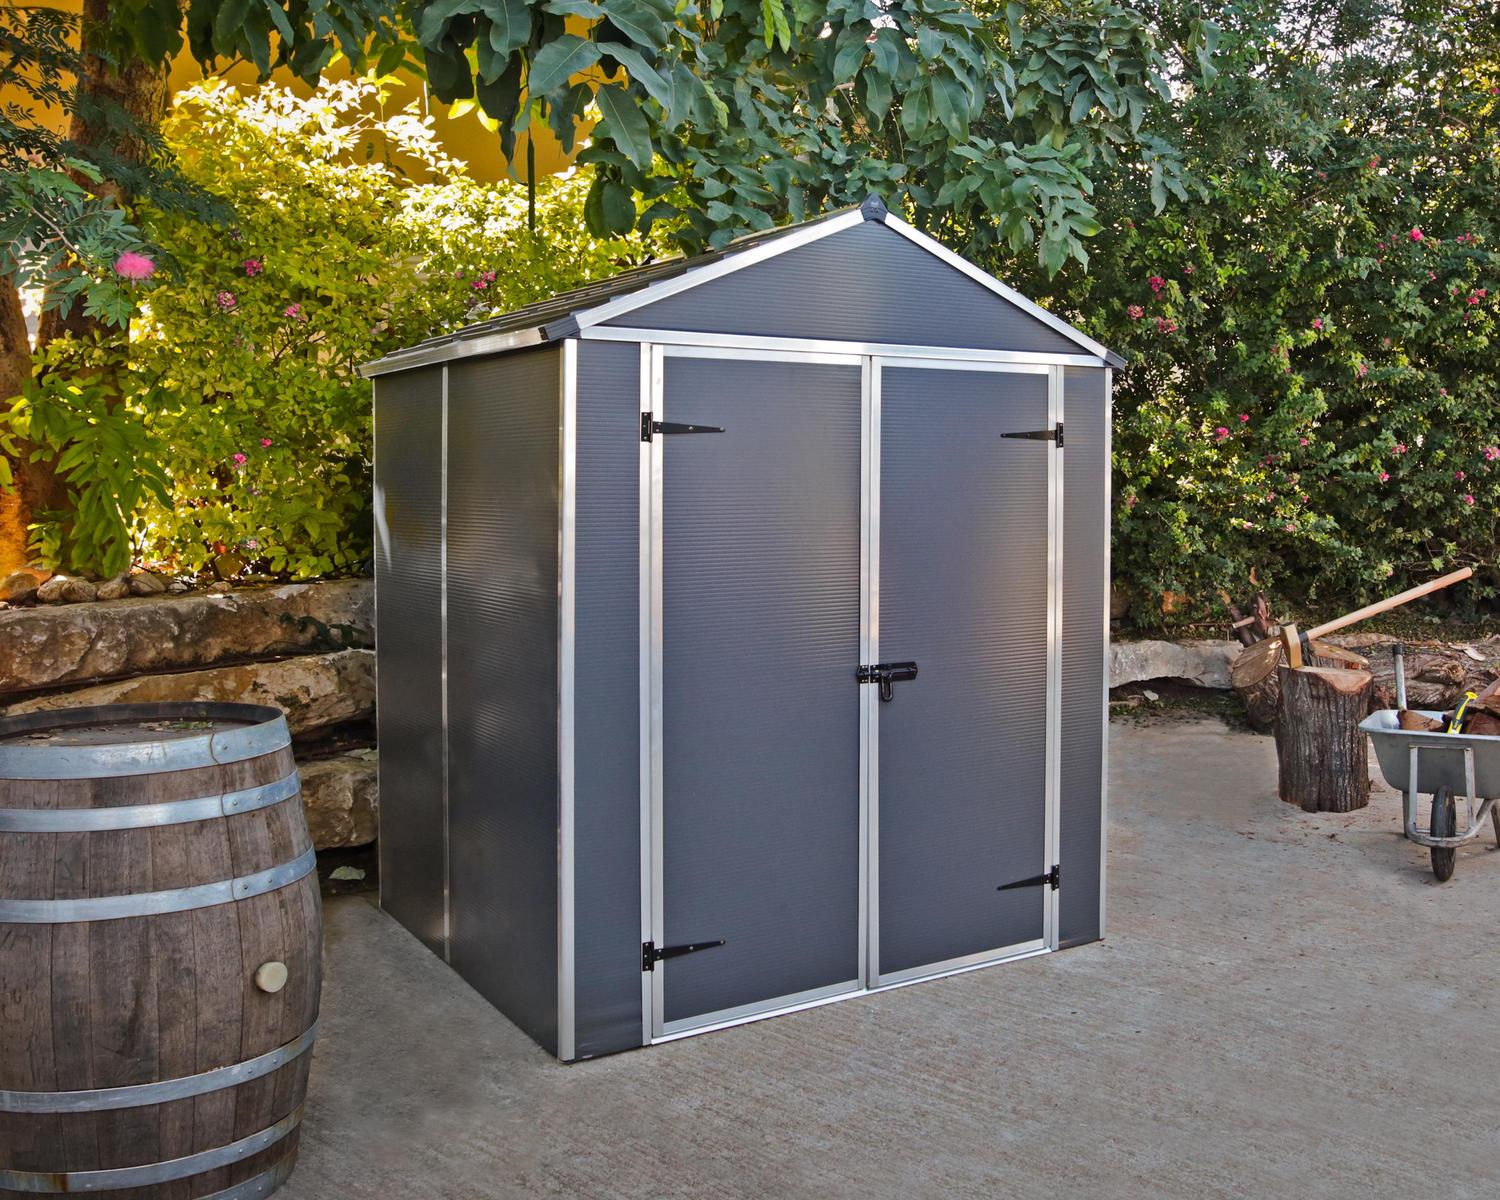 Garden Plastic Shed Rubicon 6 ft. x 5 ft. with Dark Grey Polycarbonate Multiwall & Aluminium Frame